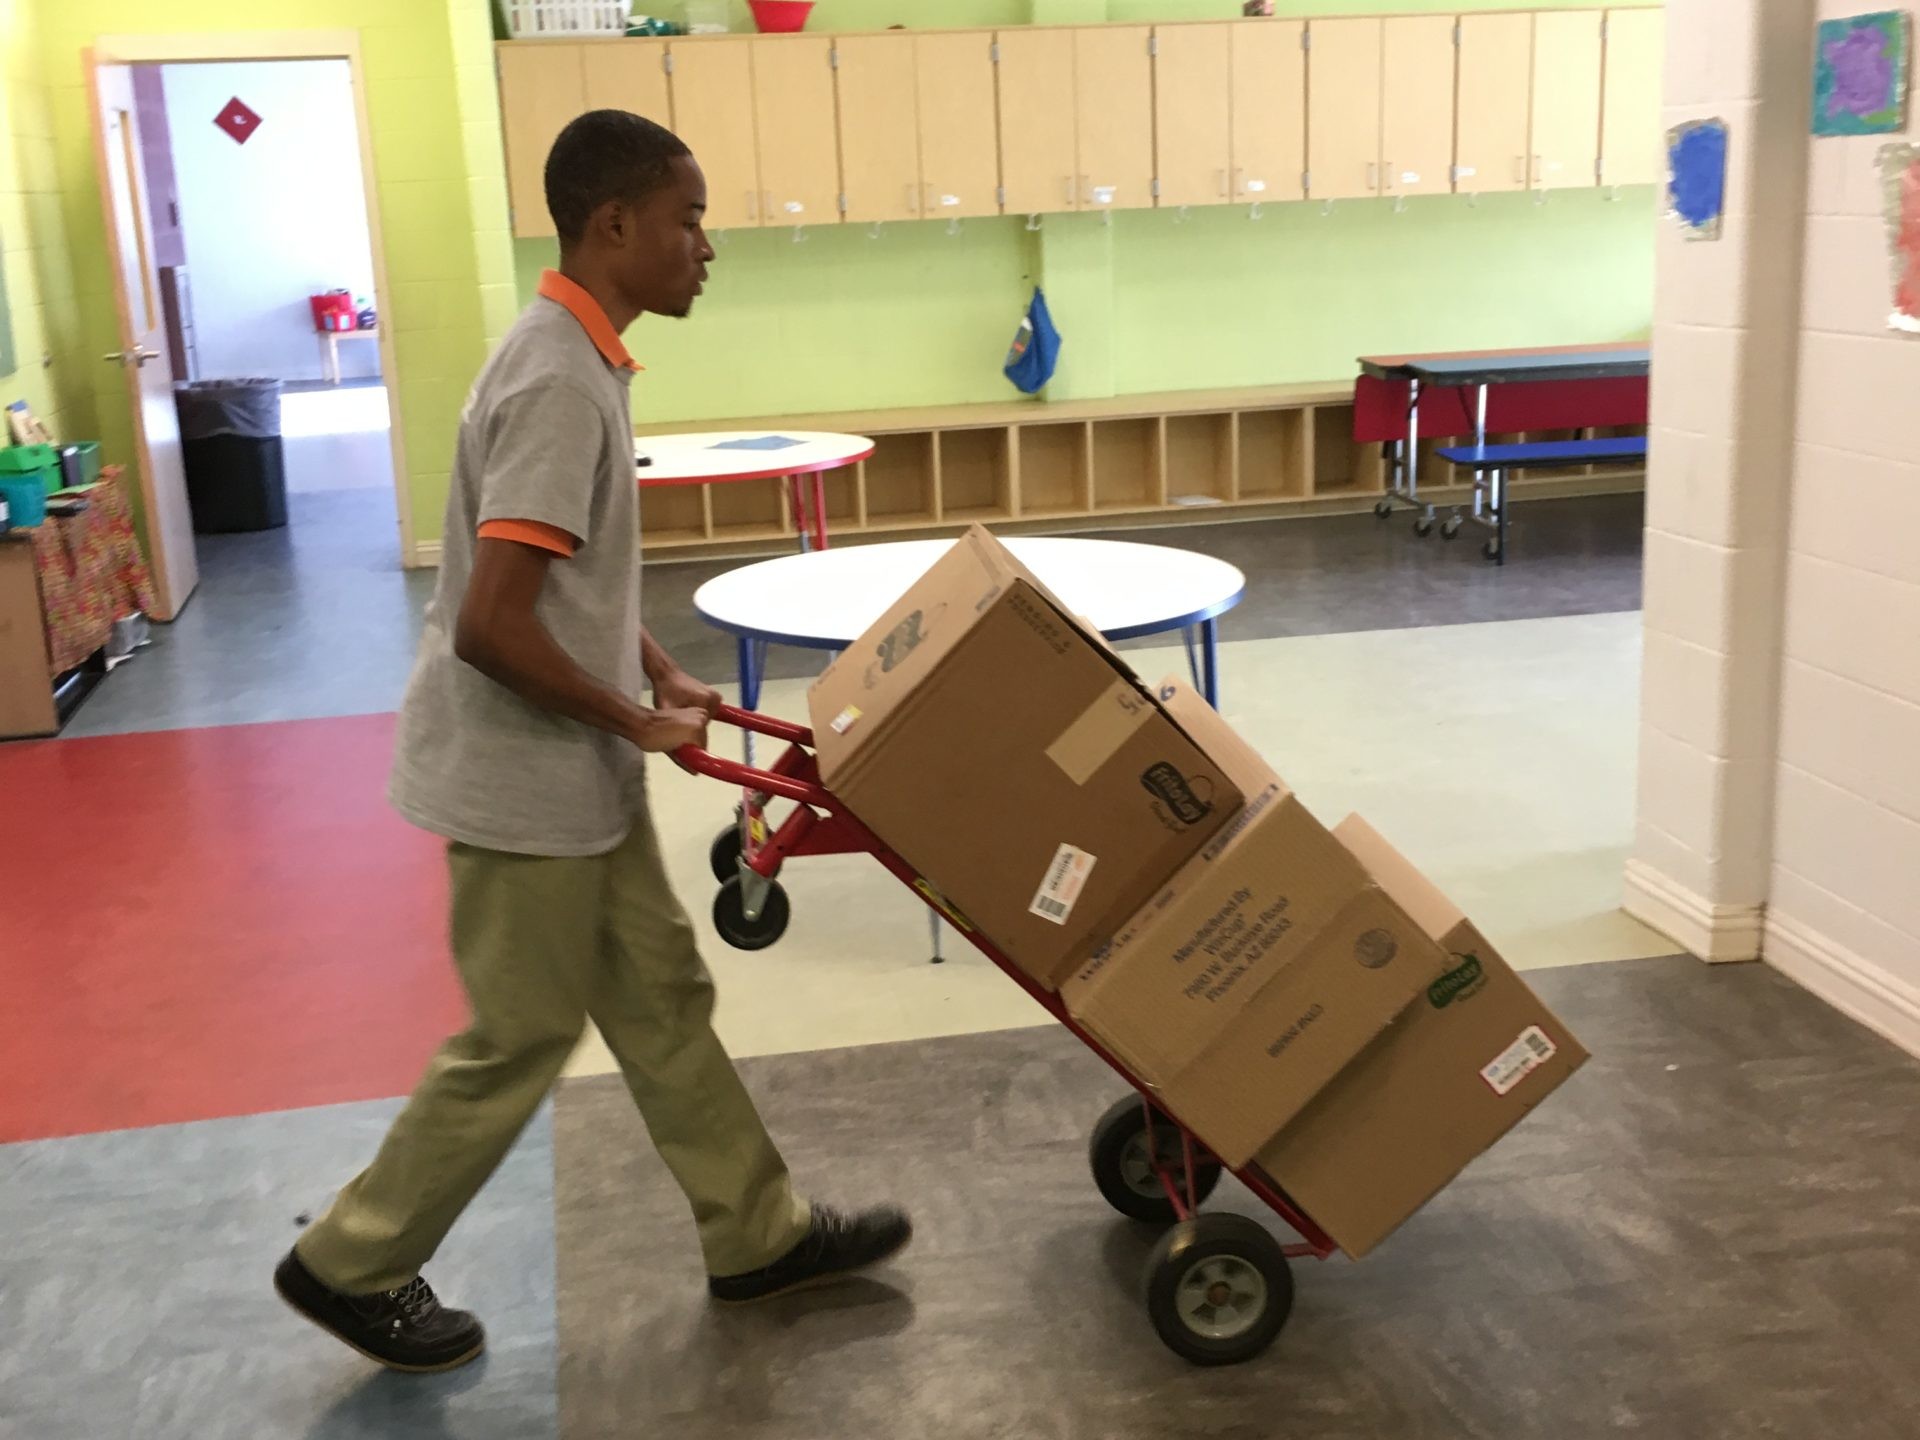 Student using dolly to transport boxes